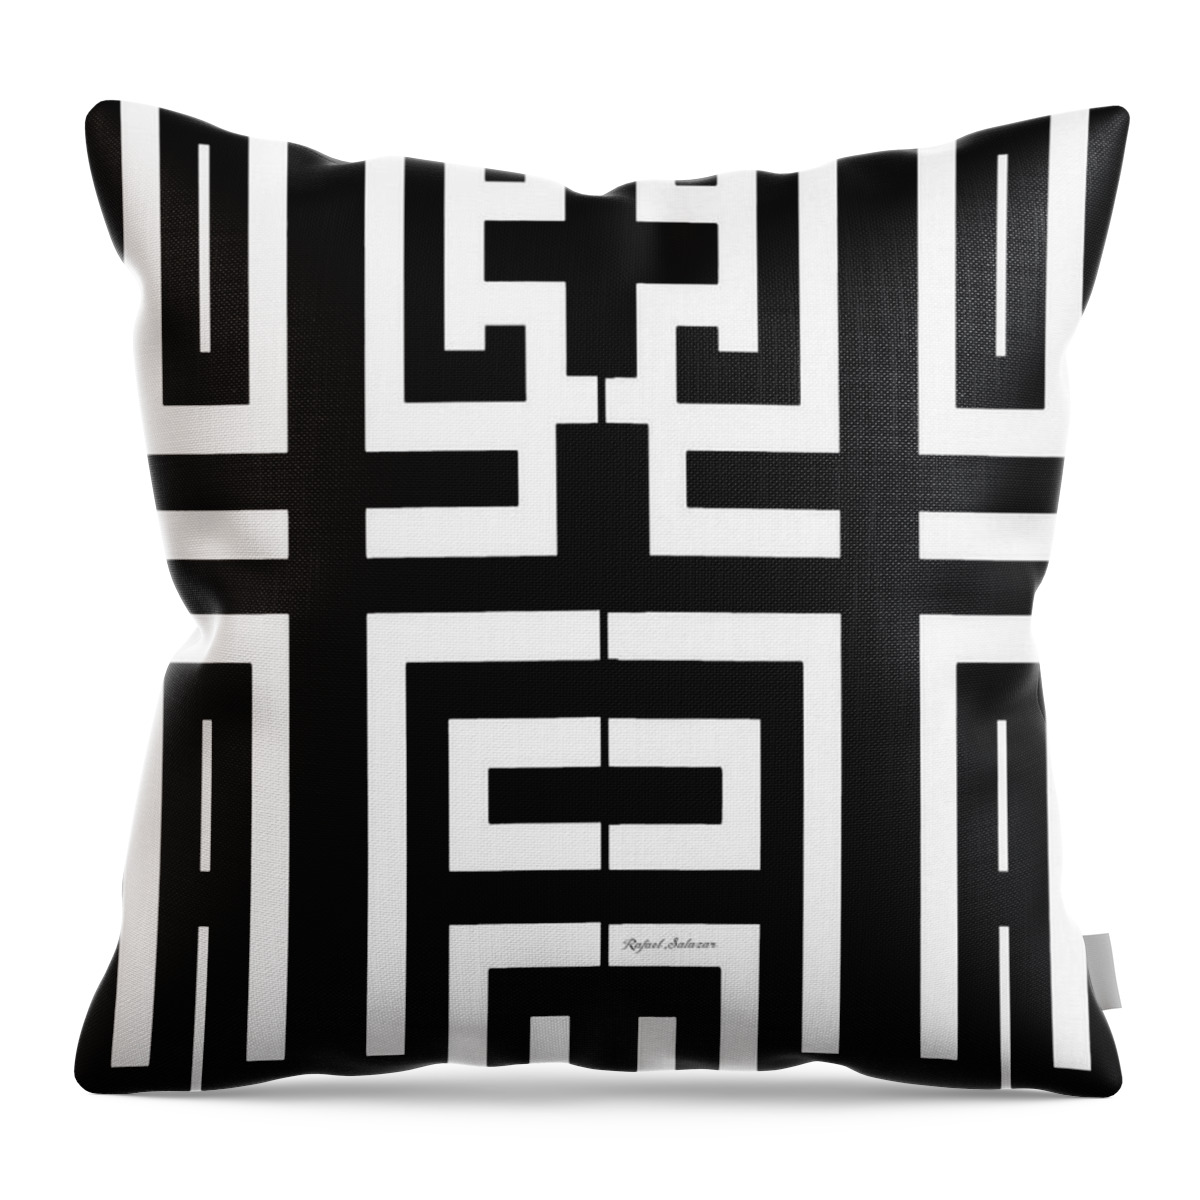 Abstract; Modern; Contemporary; Set Design; Gallery Wall; Art For Interior Designers; Book Cover; Wall Art; Geometric; Black And White; Black; White; Games Throw Pillow featuring the painting Mind Games by Rafael Salazar